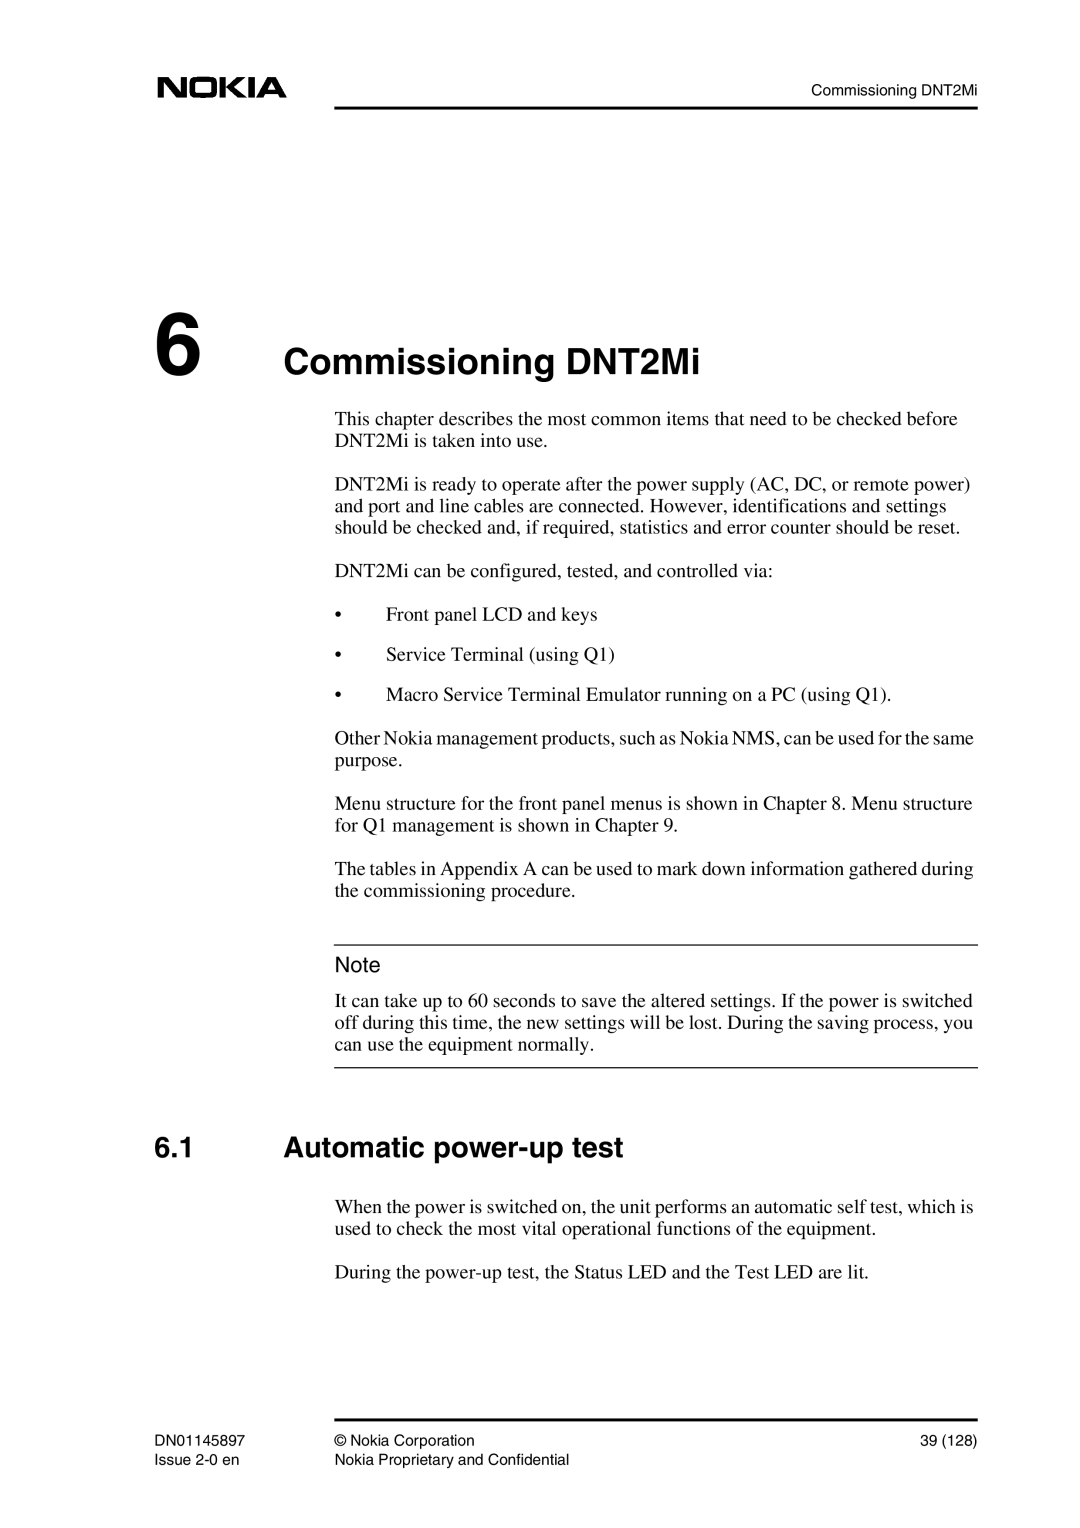 Nokia DNT2Mi sp/mp user manual Commissioning DNT2Mi, Automatic power-up test 